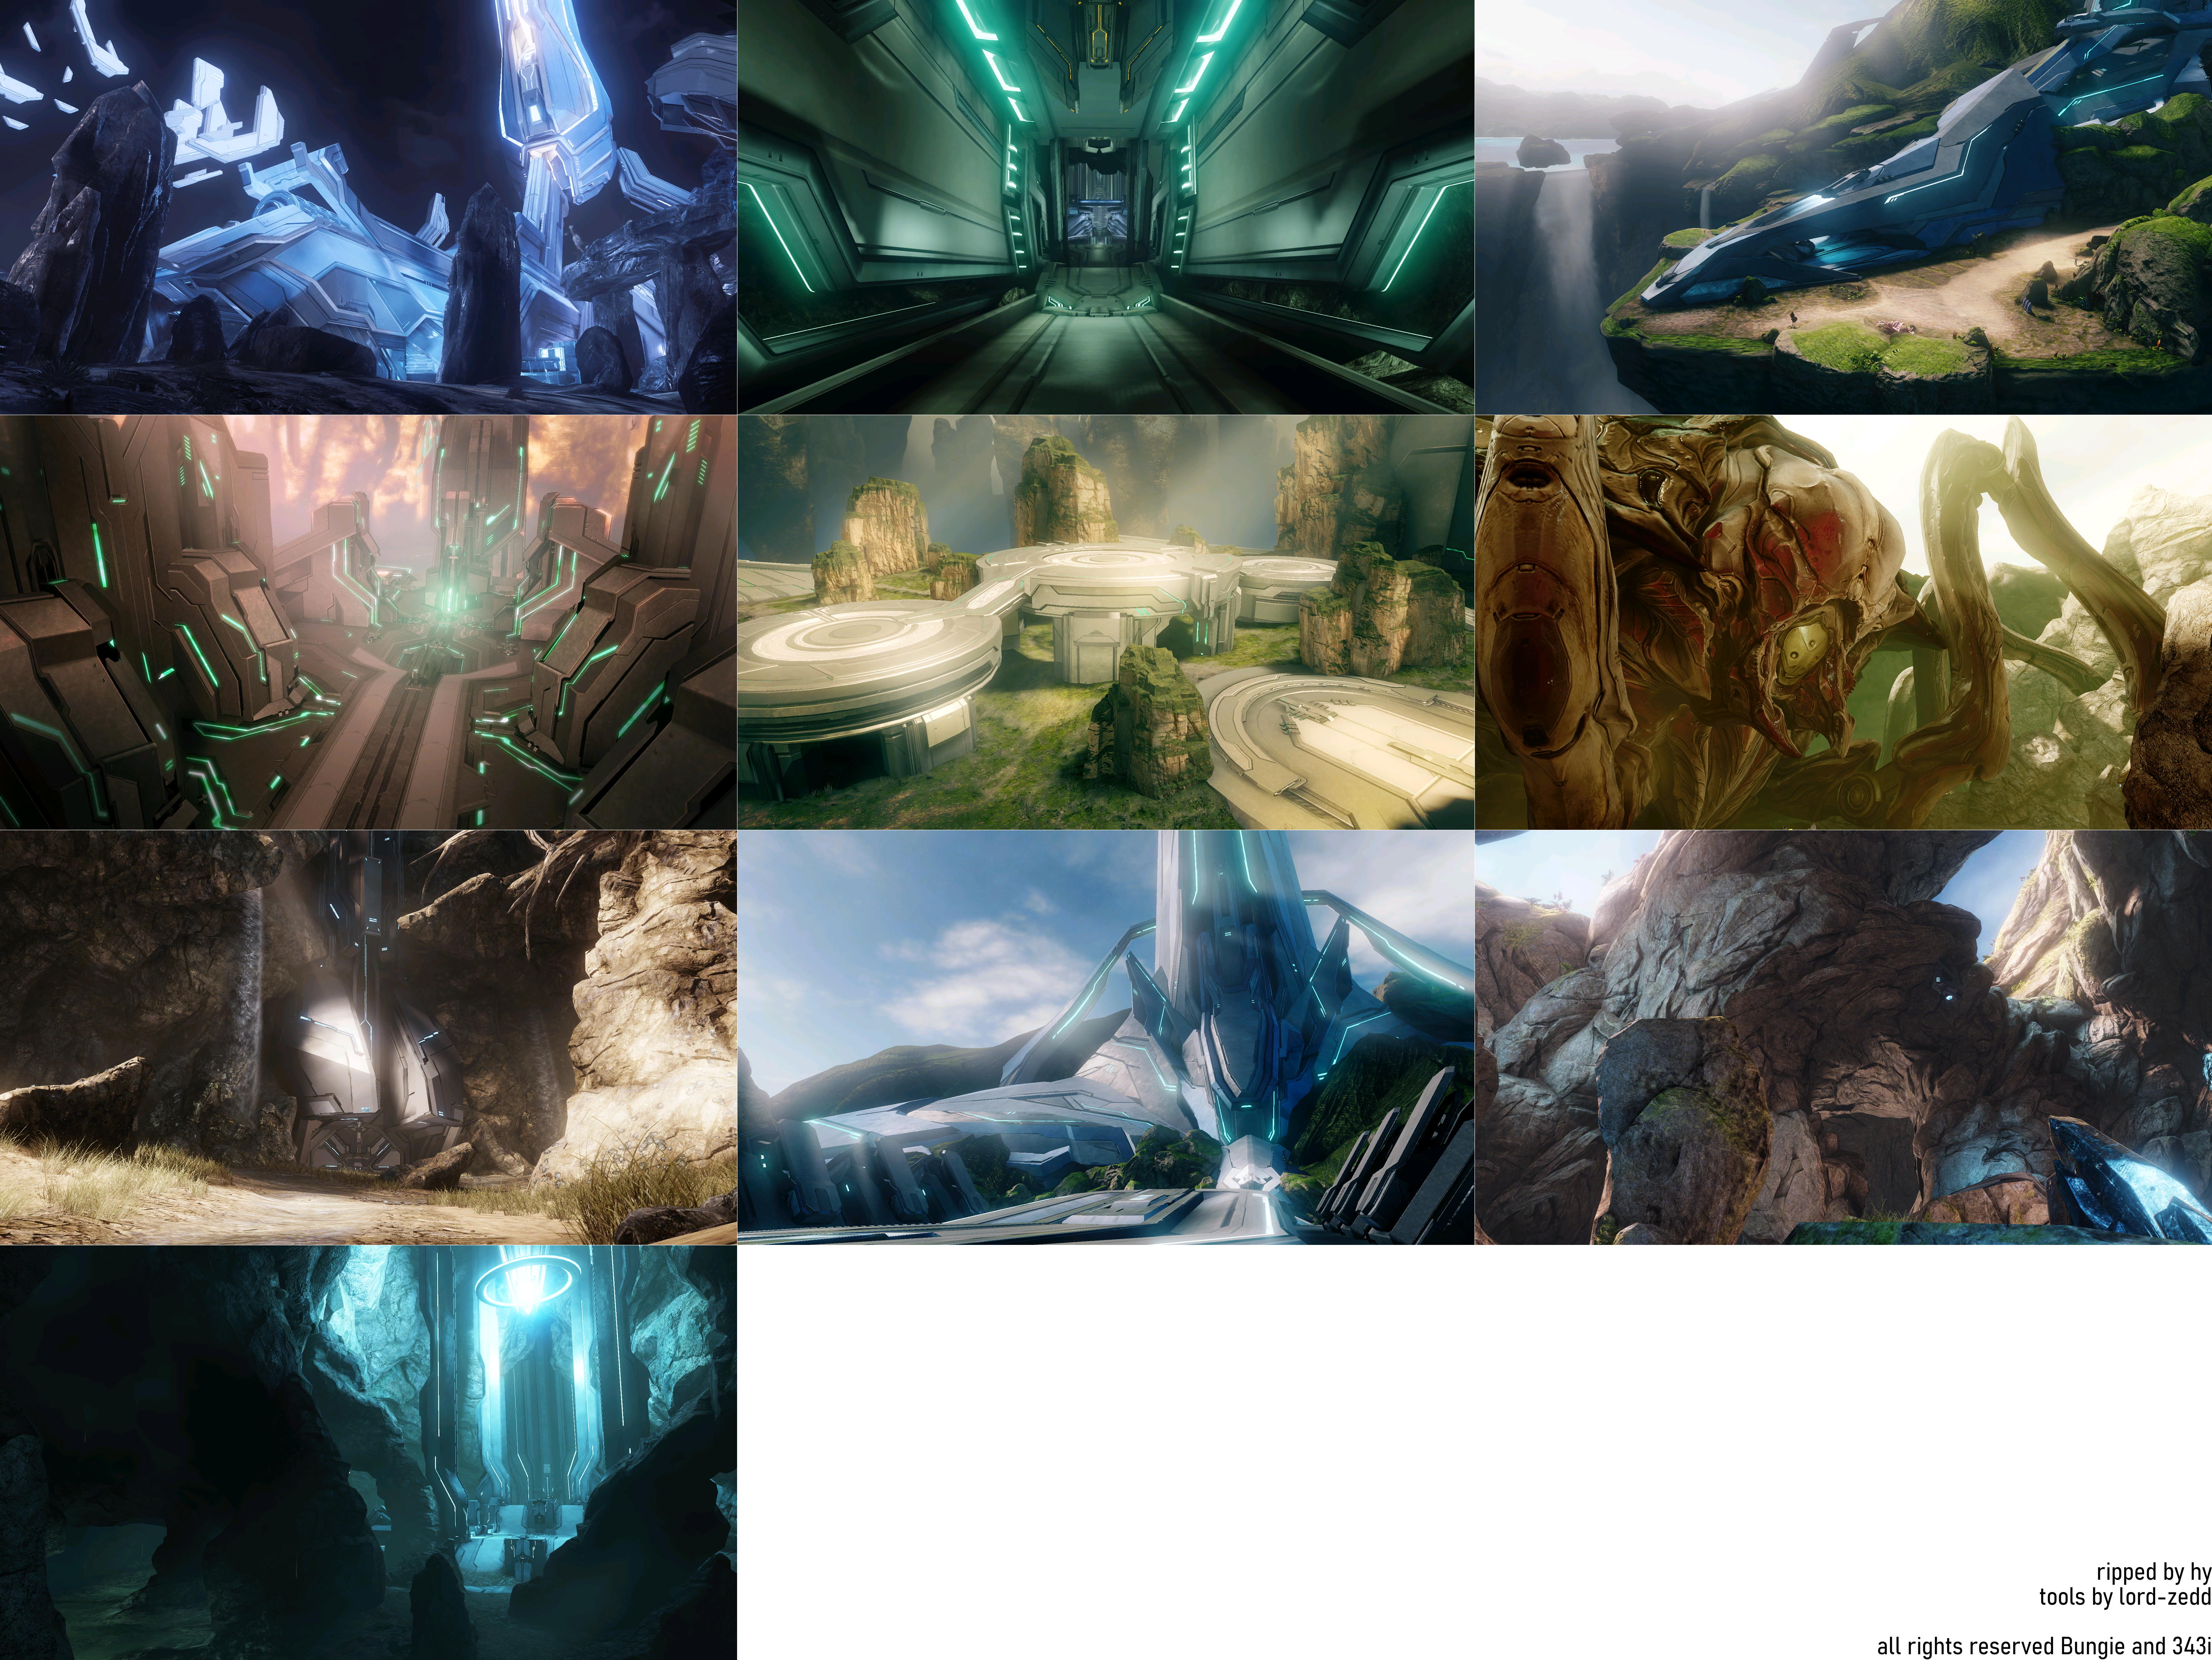 Halo: The Master Chief Collection - Halo 4 Spartan Ops Level Loading Screens